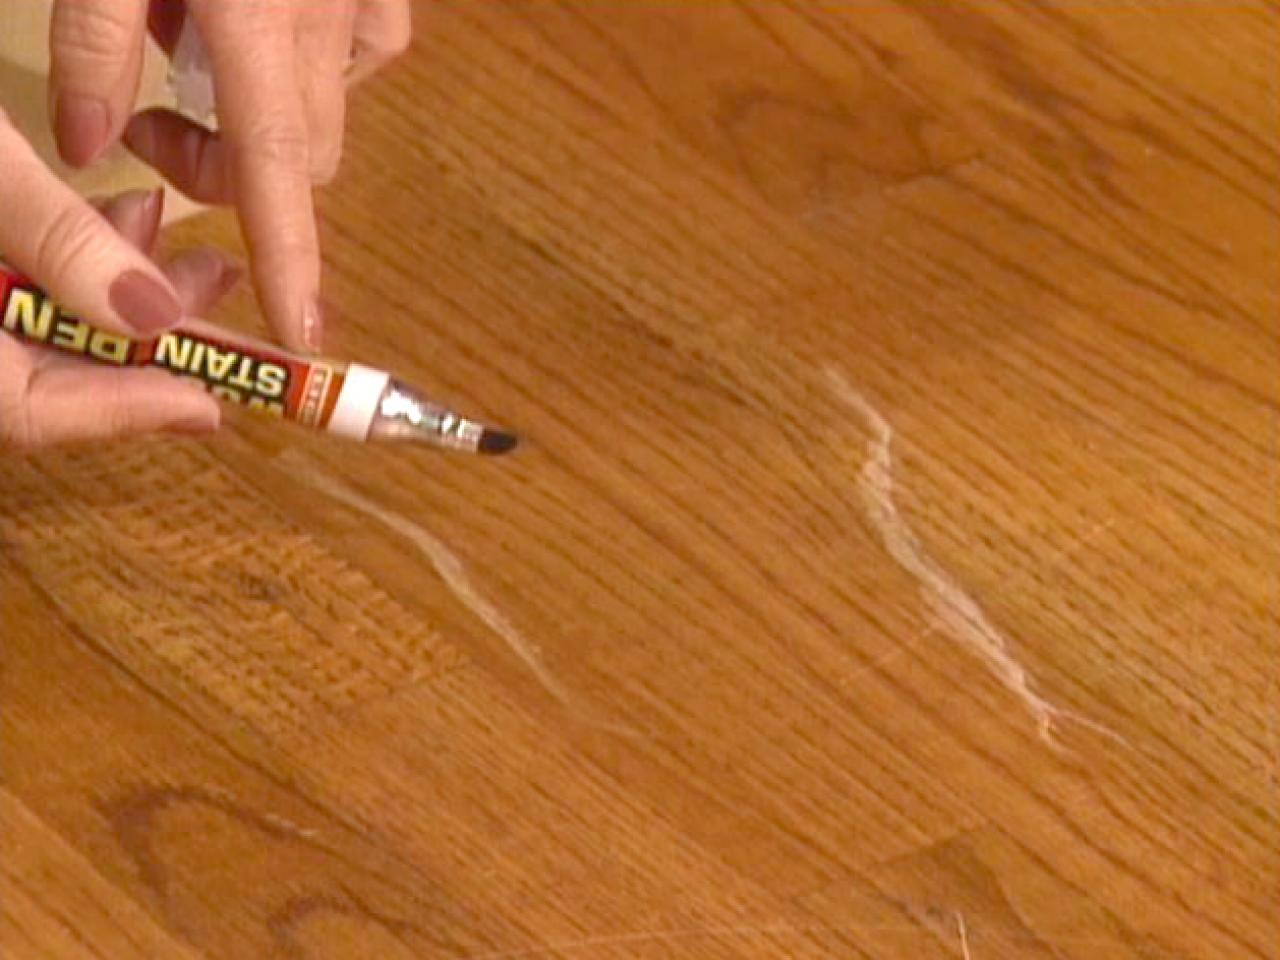 How To Touch Up Wood Floors Tos Diy, Hardwood Floor Wax For Scratches